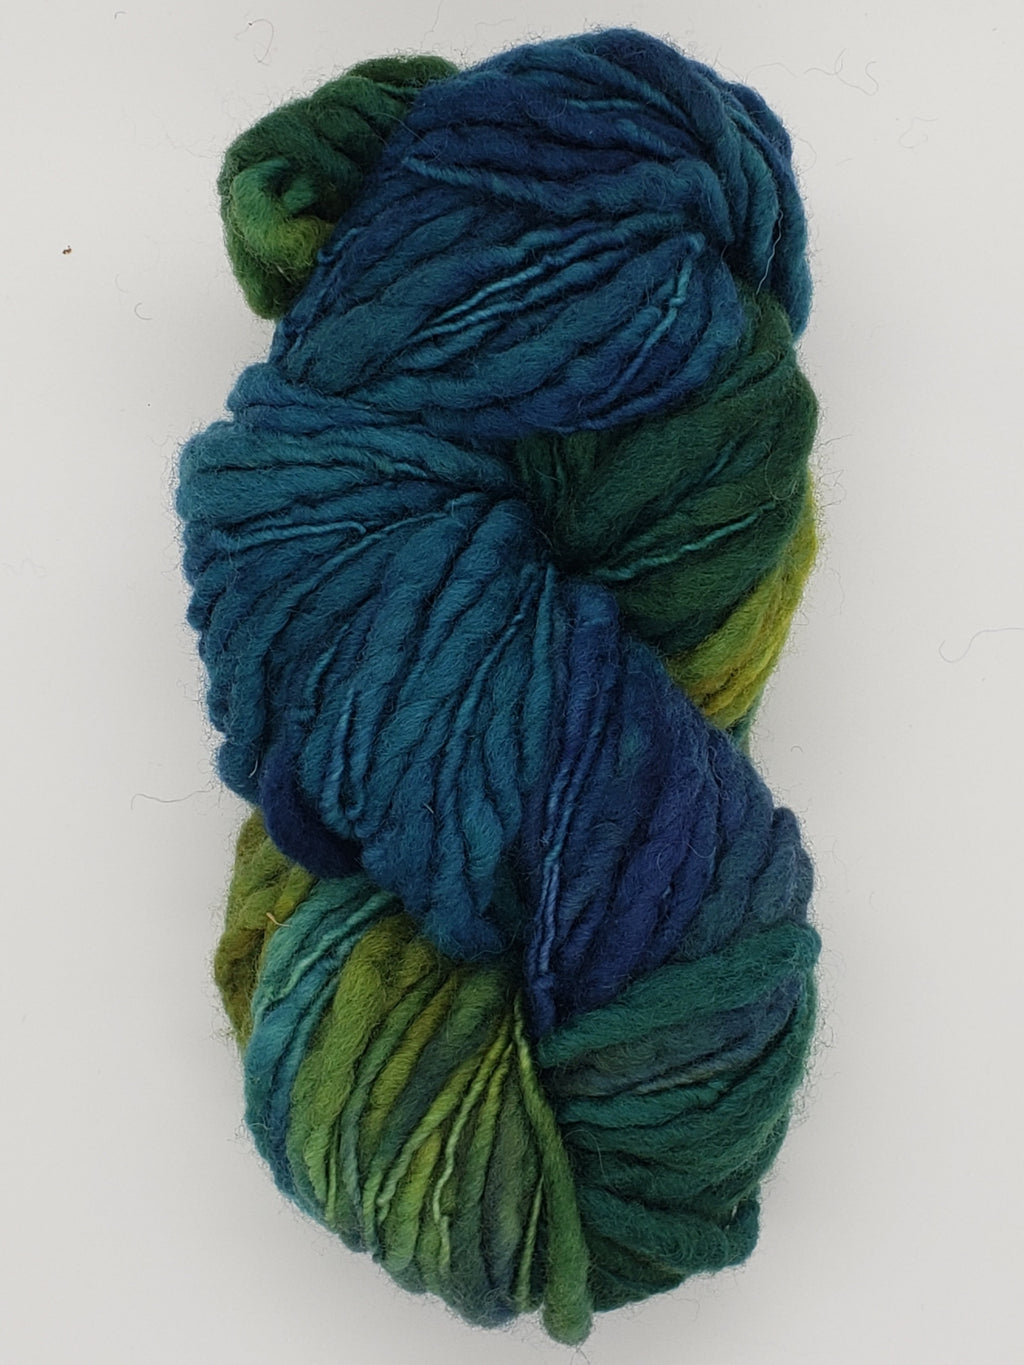 Slubby - SPRUCE - Merino/Blue Face Leicester - Hand Dyed Textured Yarn Thick and Thin  - Shades of Blue and Green